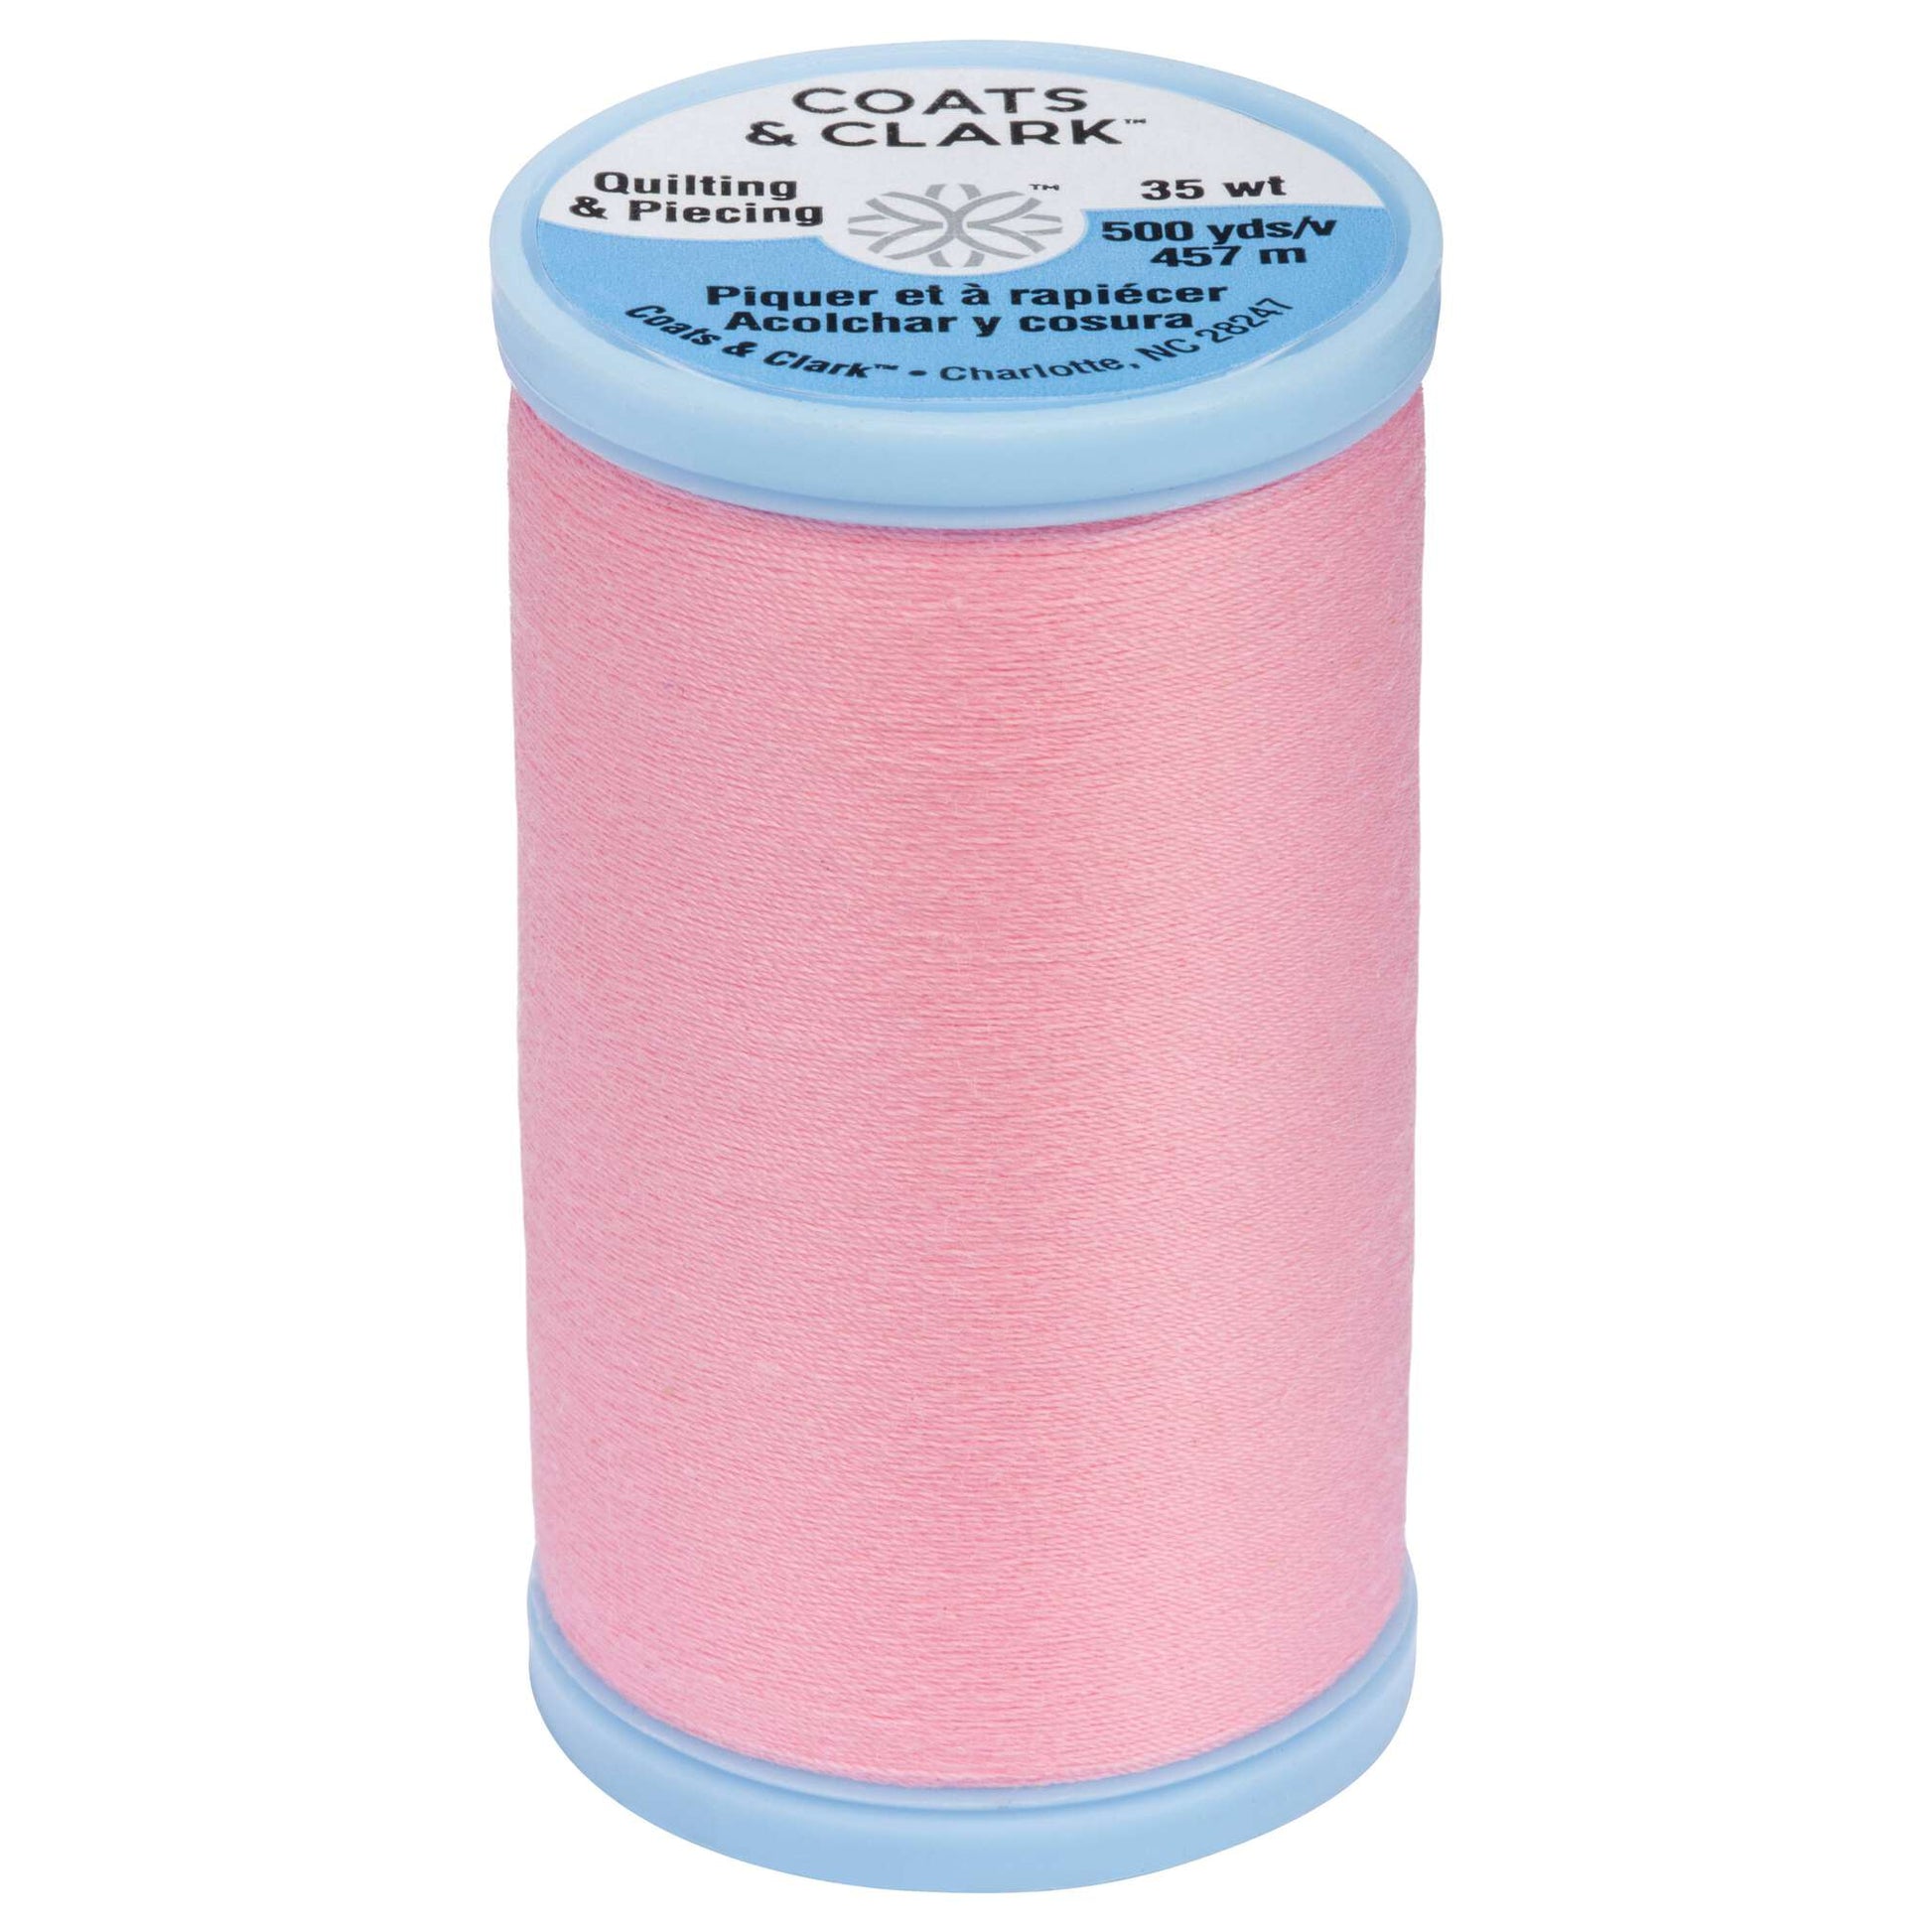 Coats & Clark Cotton Covered Quilting & Piecing Thread (500 Yards)